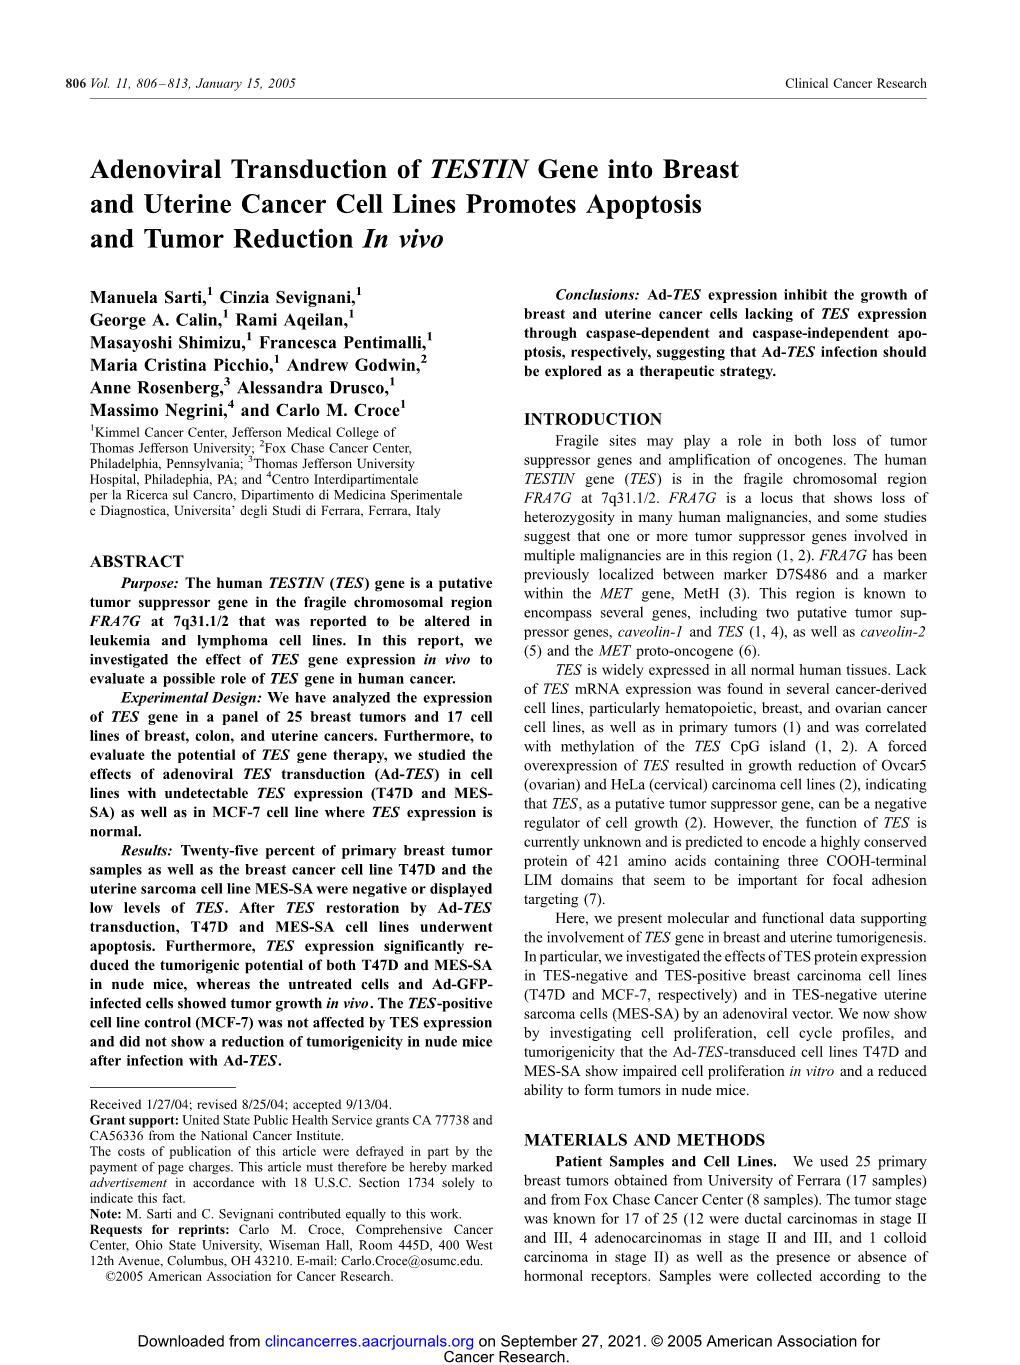 Adenoviral Transduction of TESTIN Gene Into Breast and Uterine Cancer Cell Lines Promotes Apoptosis and Tumor Reduction in Vivo